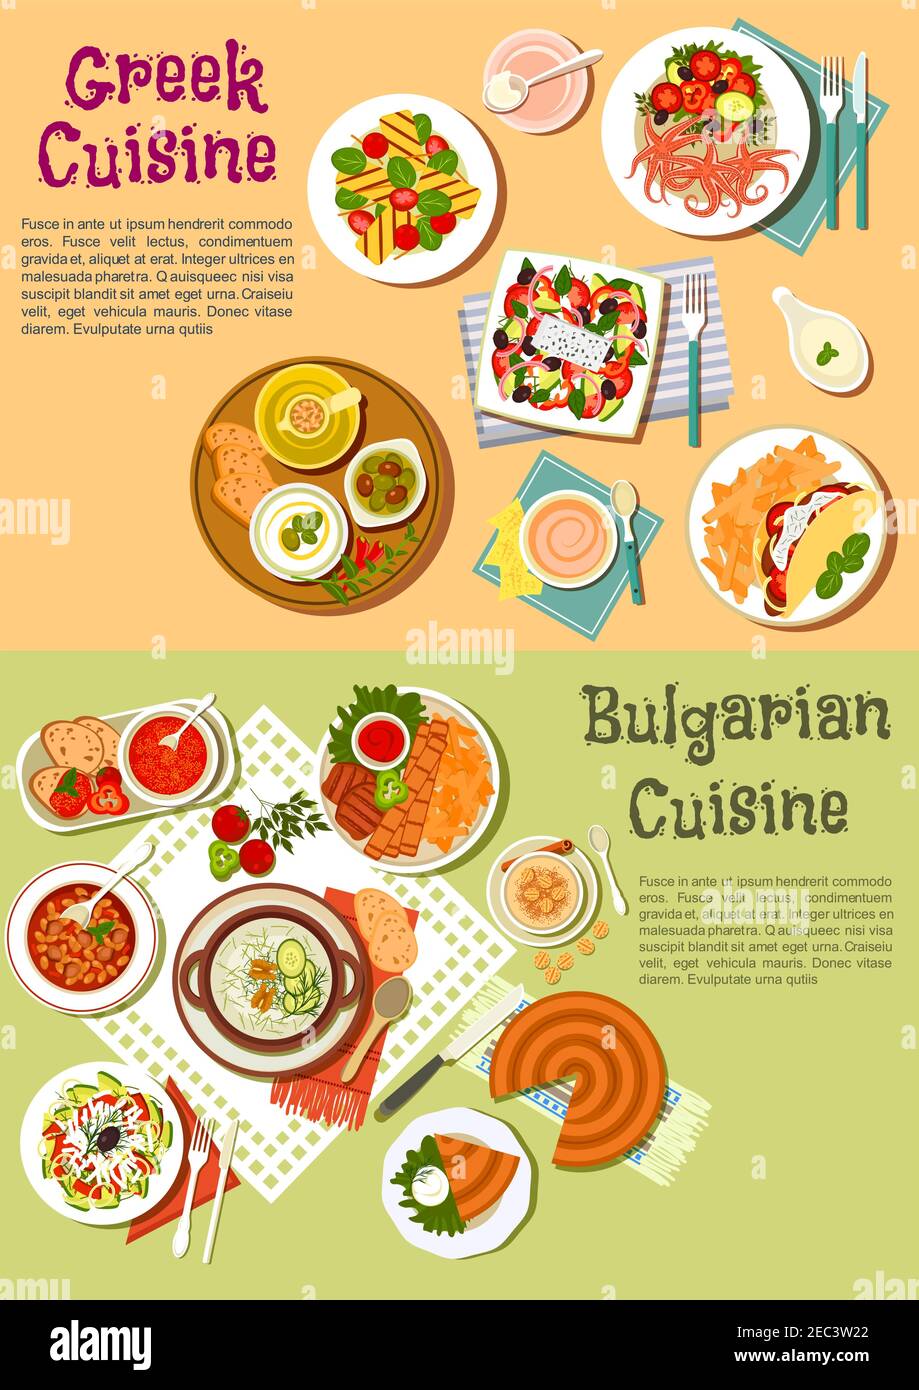 Typical national dishes of Greece and Bulgaria symbol of greek and bulgarian vegetable salads with cheese, olives, tzatziki and tomato sauces, grilled Stock Vector